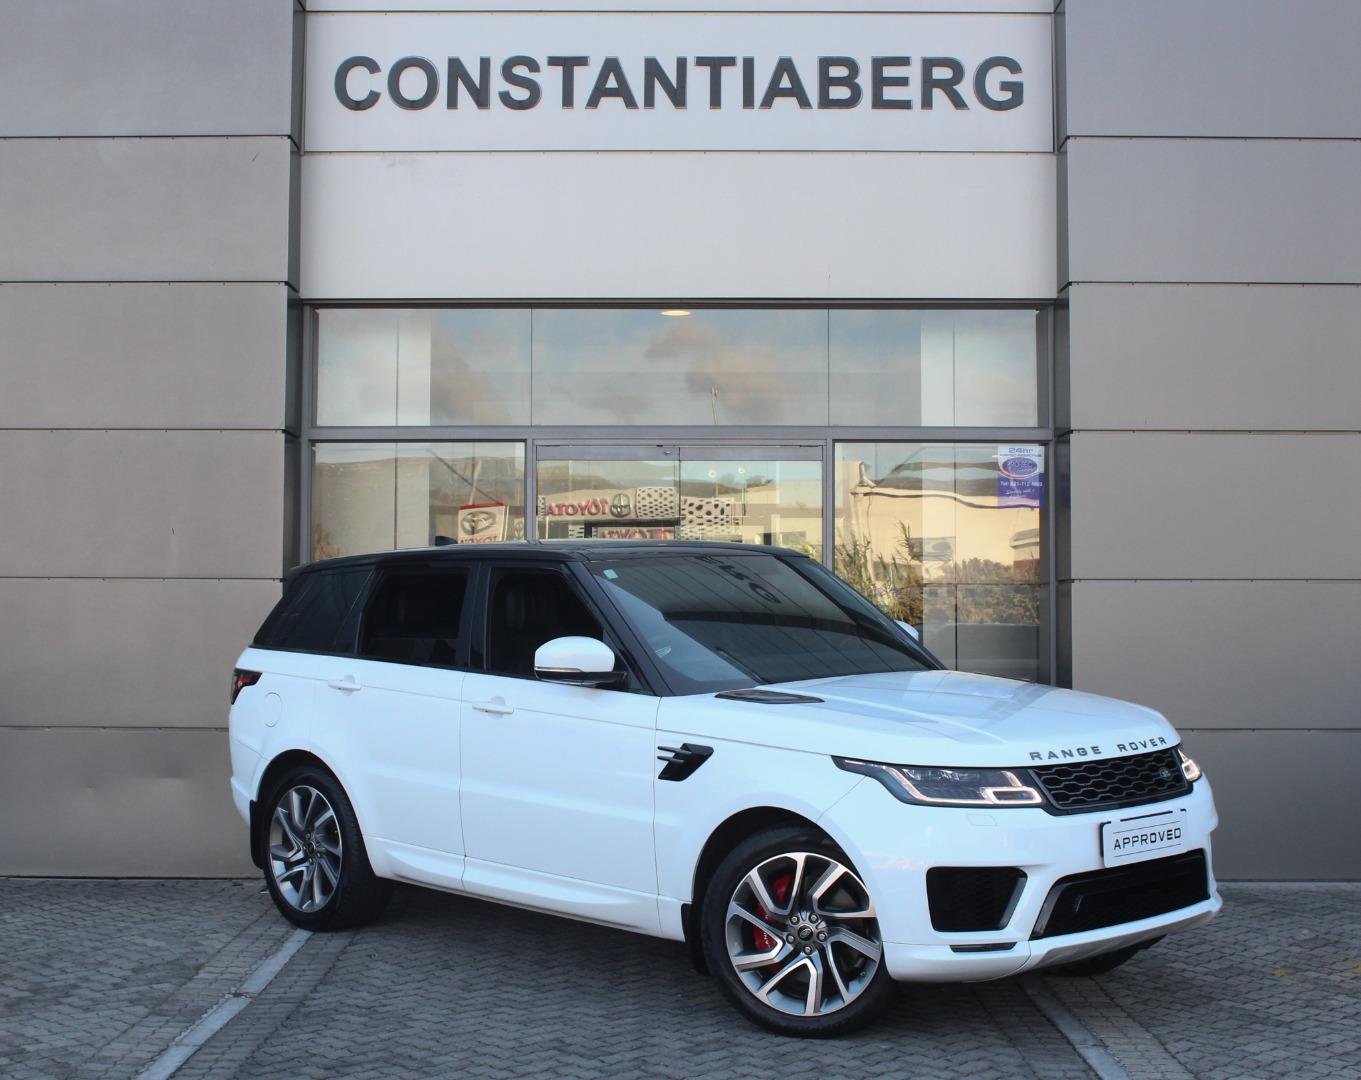 2021 Land Rover Range Rover Sport  for sale - SMG11|USED|45URS04719